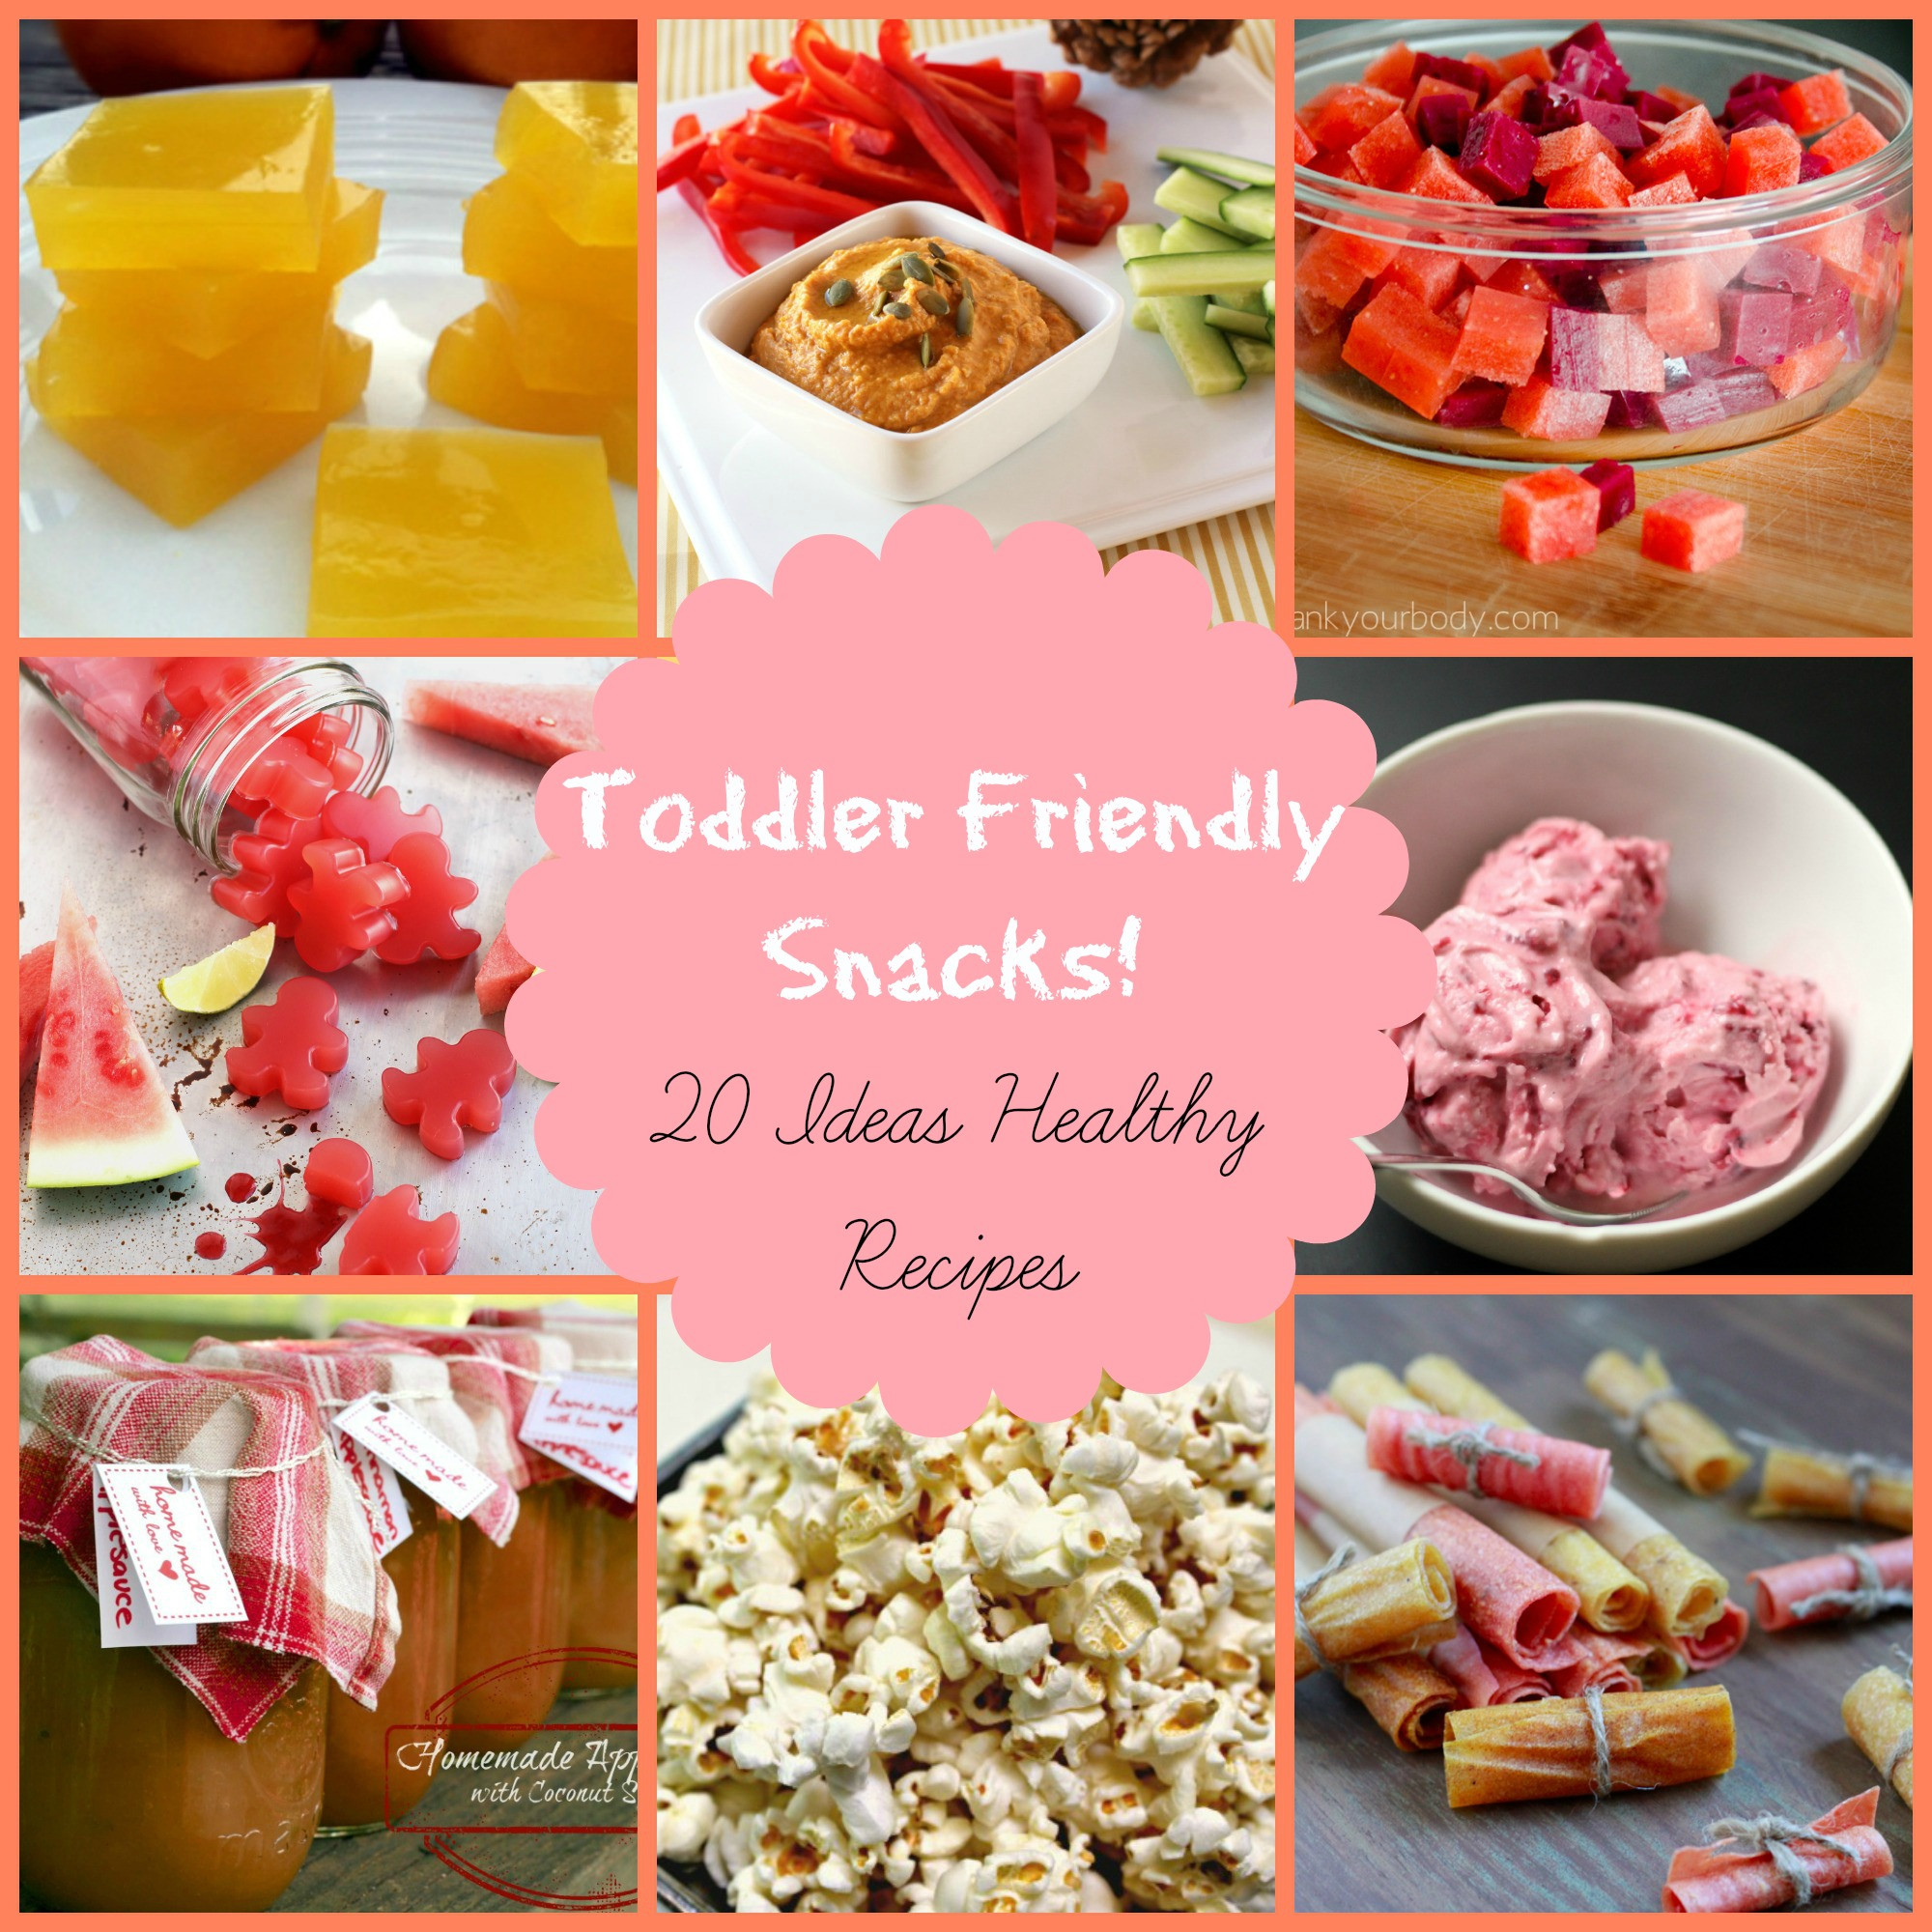 Healthy Snacks For Kids To Buy
 Healthy Snacks for Kids 20 toddler friendly ideas